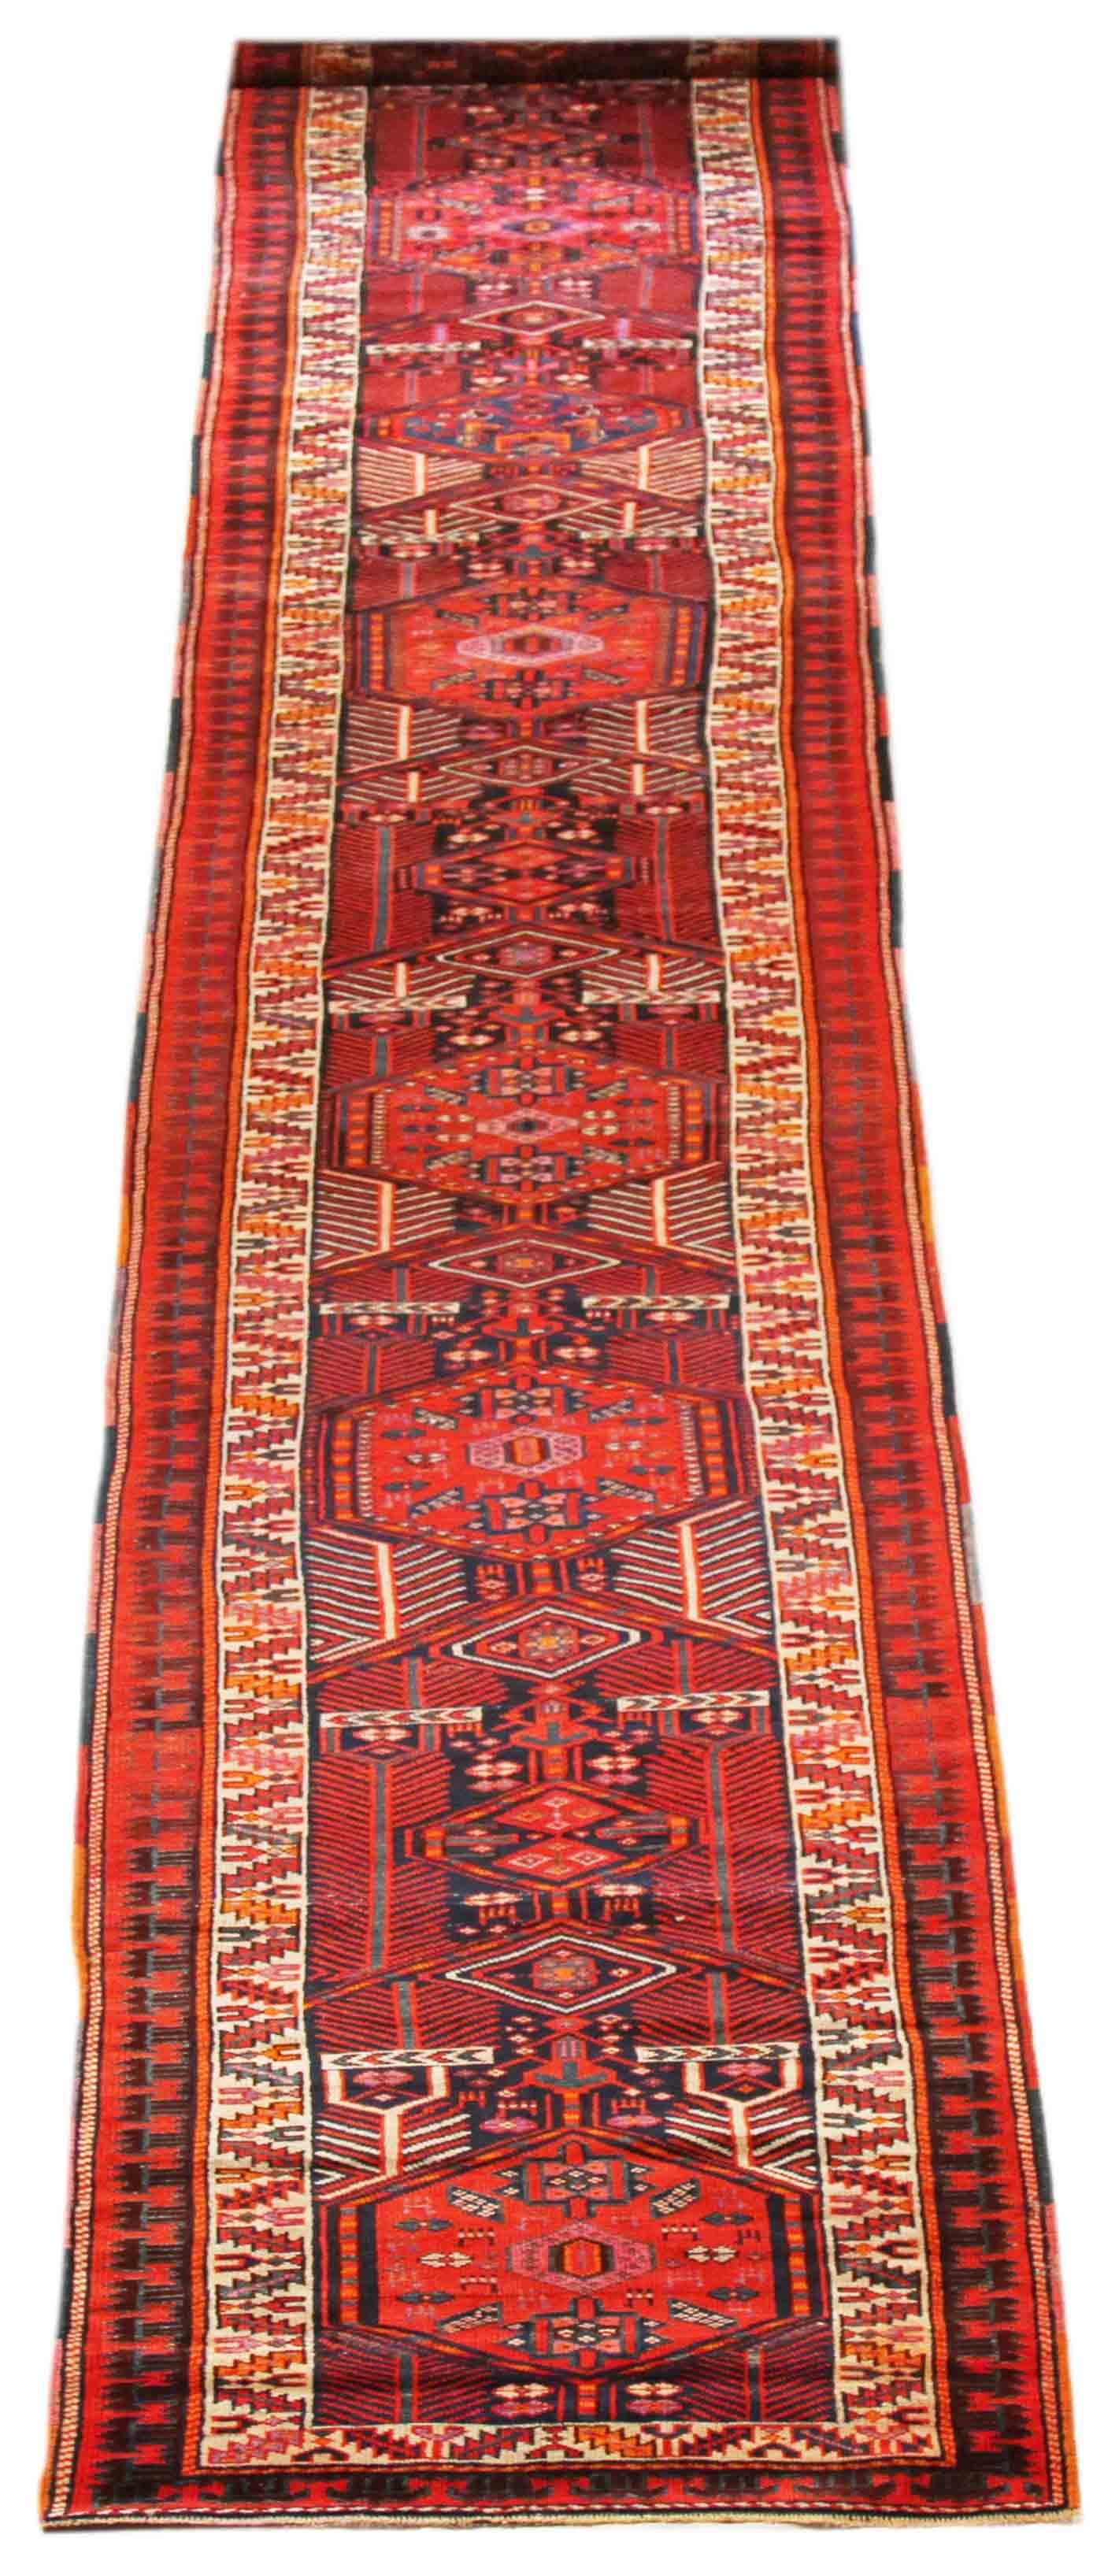 1900s Antique Persian Rug in Azerbaijan Design with Extended Length In Excellent Condition For Sale In Dallas, TX